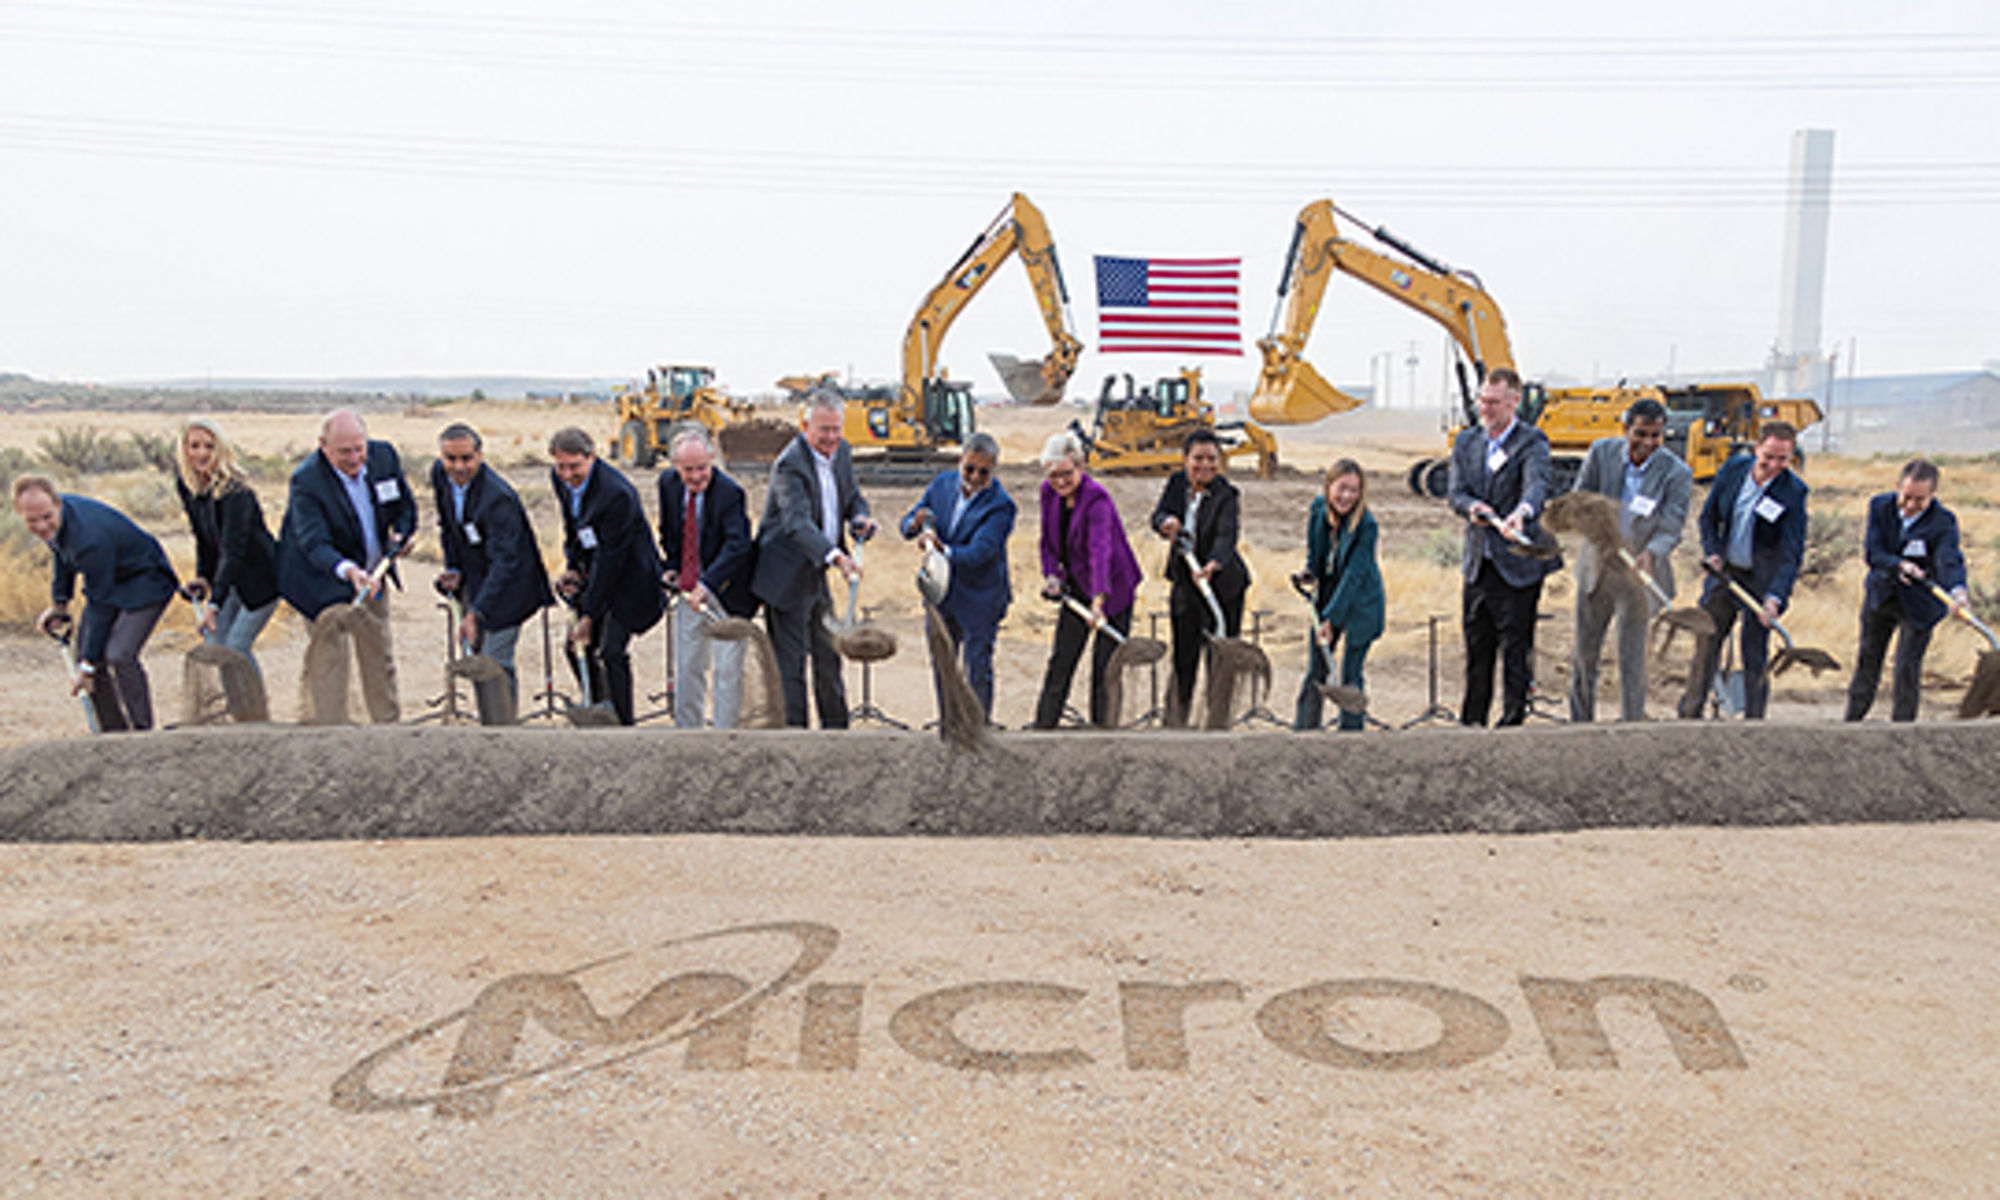 Micron leaders and VIPs attend Boise fab groundbreaking ceremony